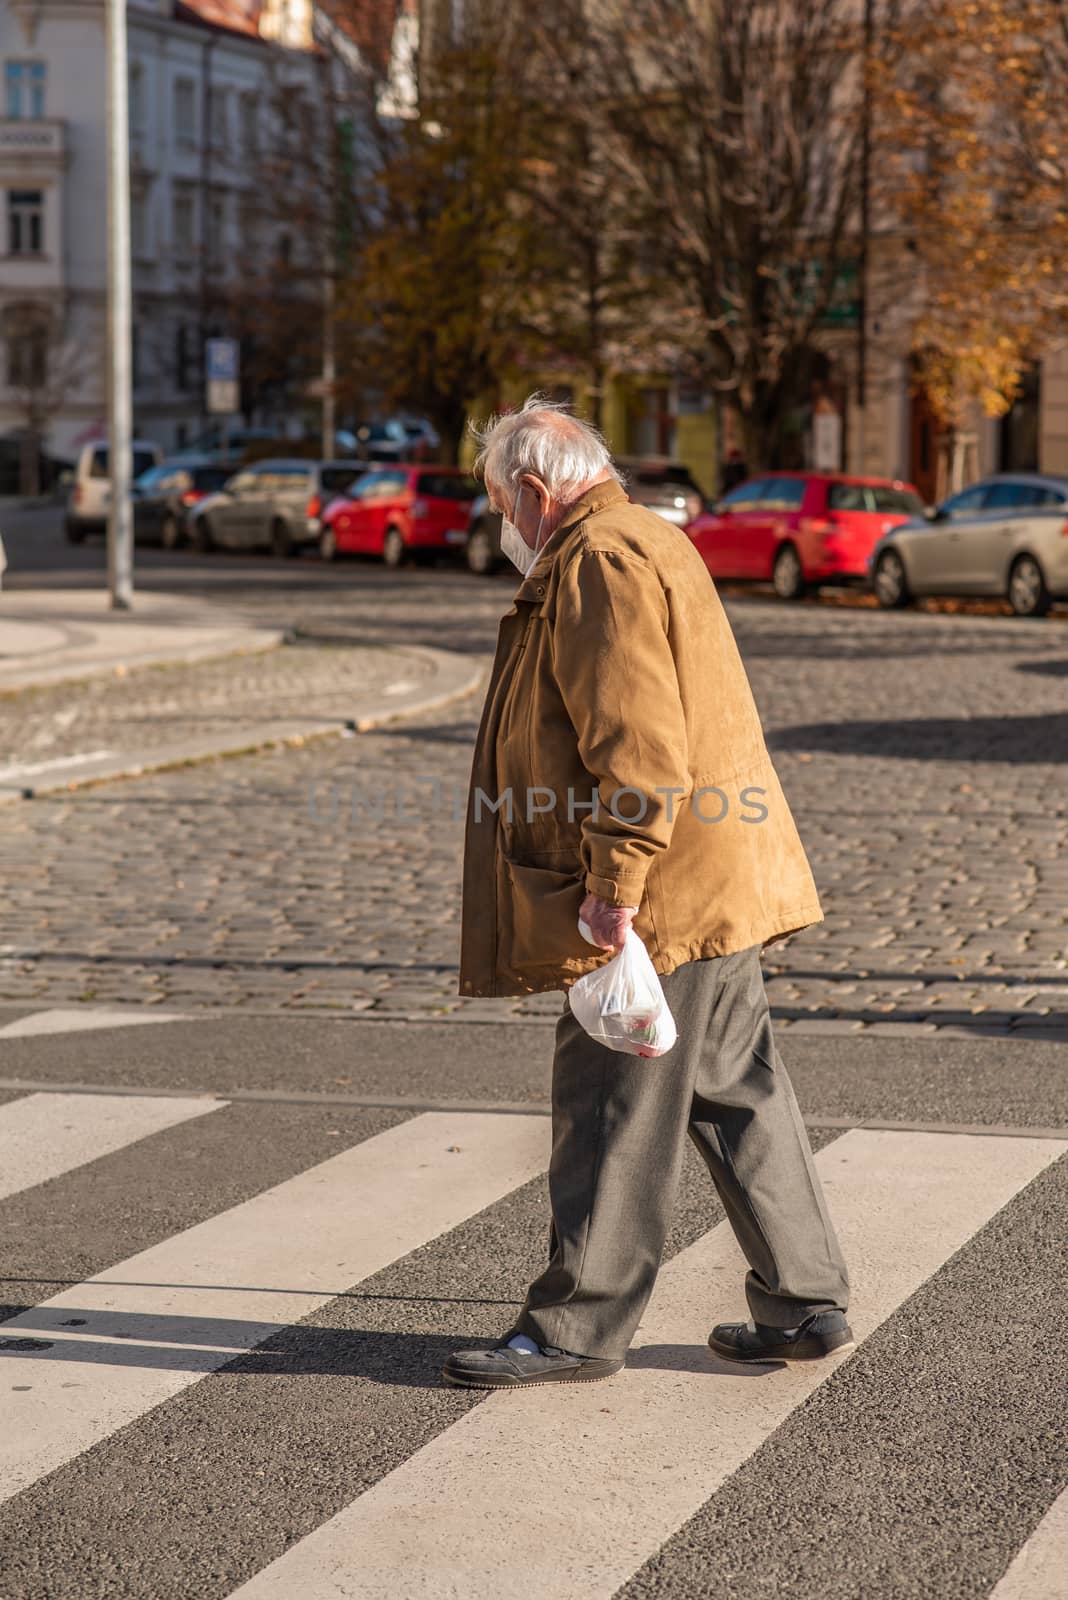 People on a sunny winter day during coronavirus. Last suny days. People are walking, doing some sports or having time to relax. Prague 6, Czech Republic. by gonzalobell